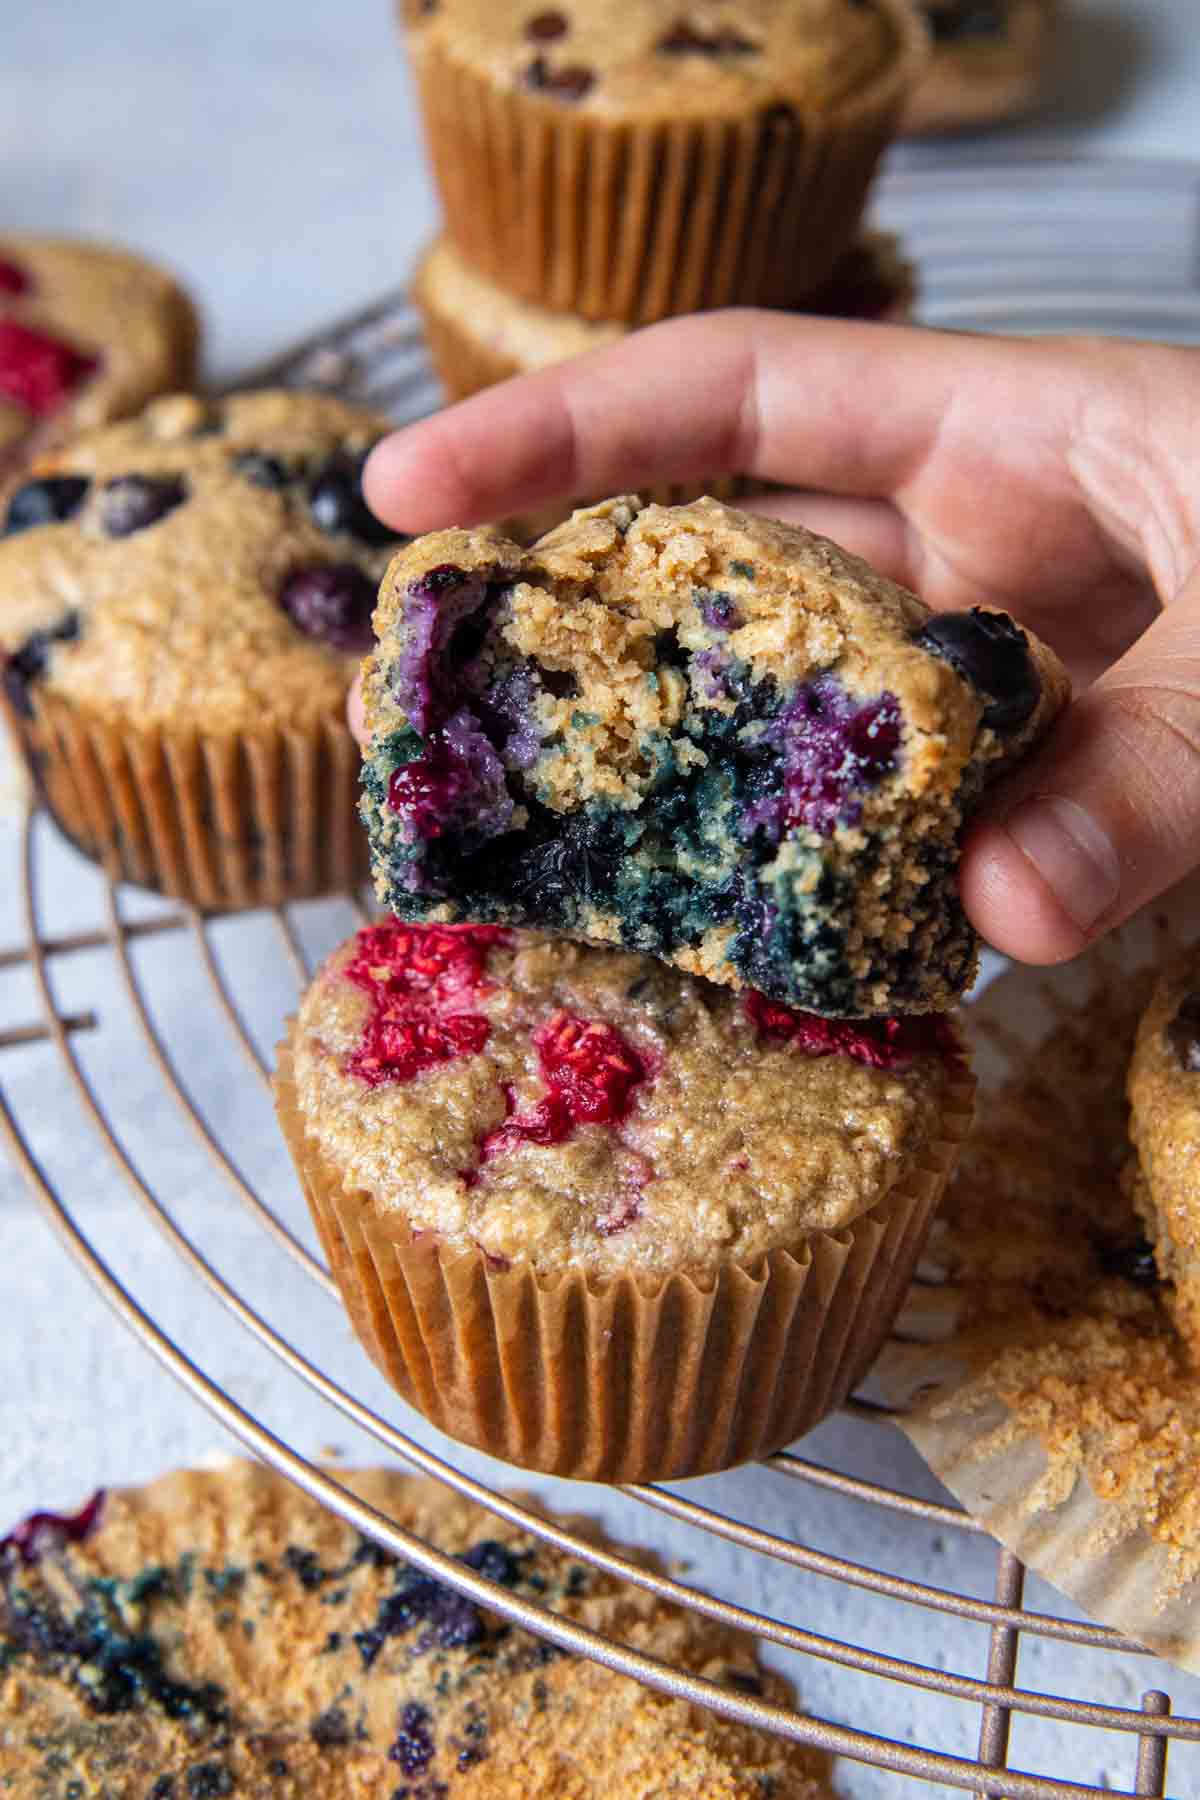 a blueberry muffin bitten into and held up